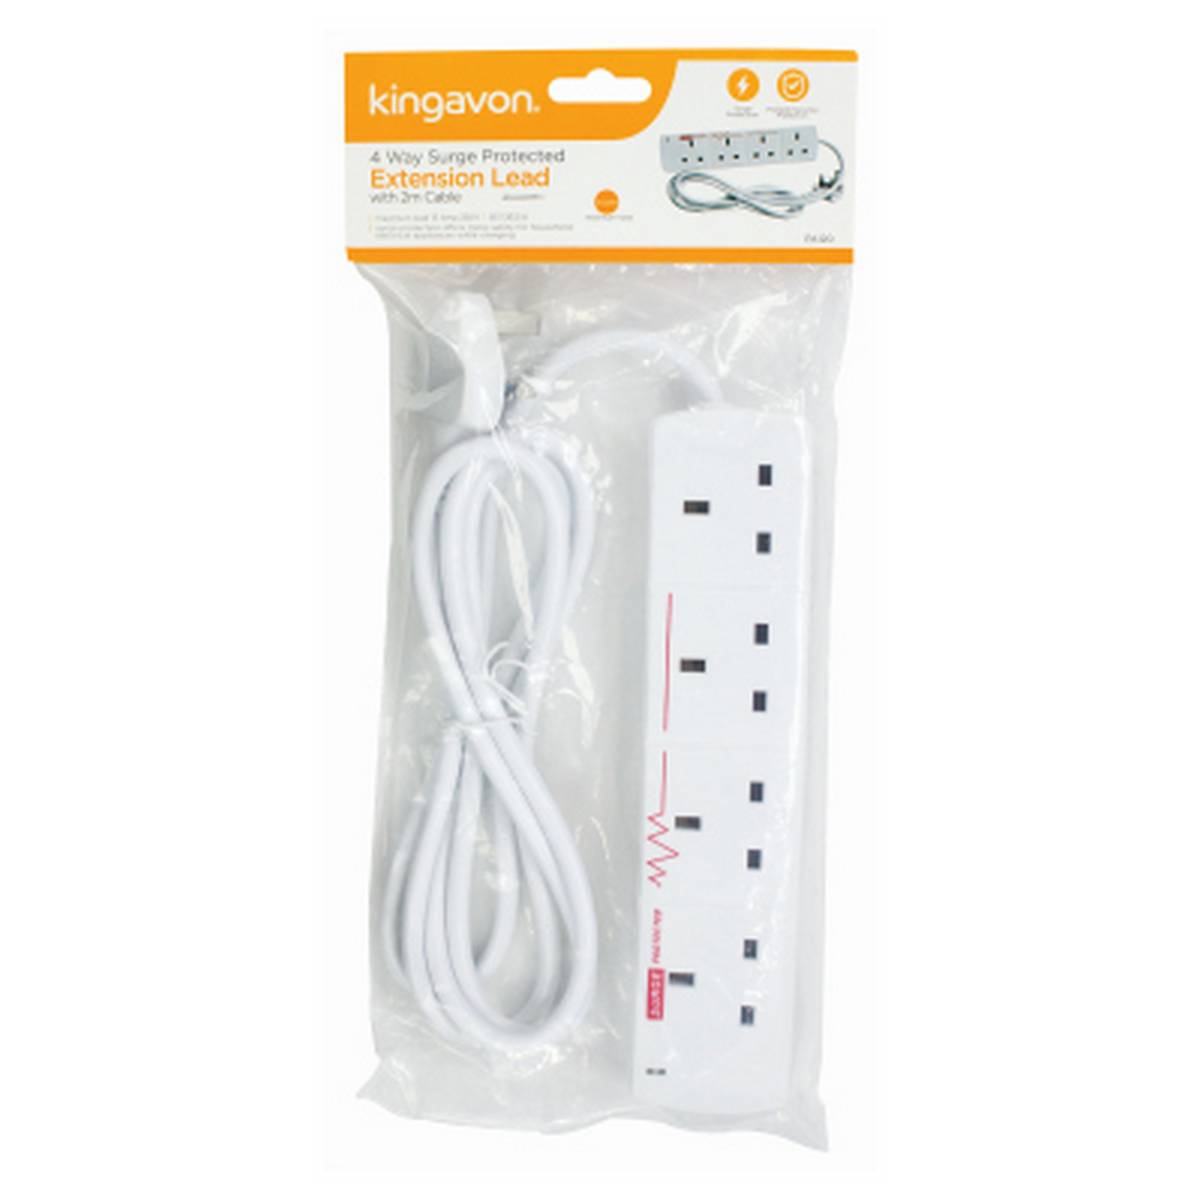 KINGAVON 4 WAY SURGE PROTECTED EXTENSION LEAD WITH 2M CABLE BB-PA120